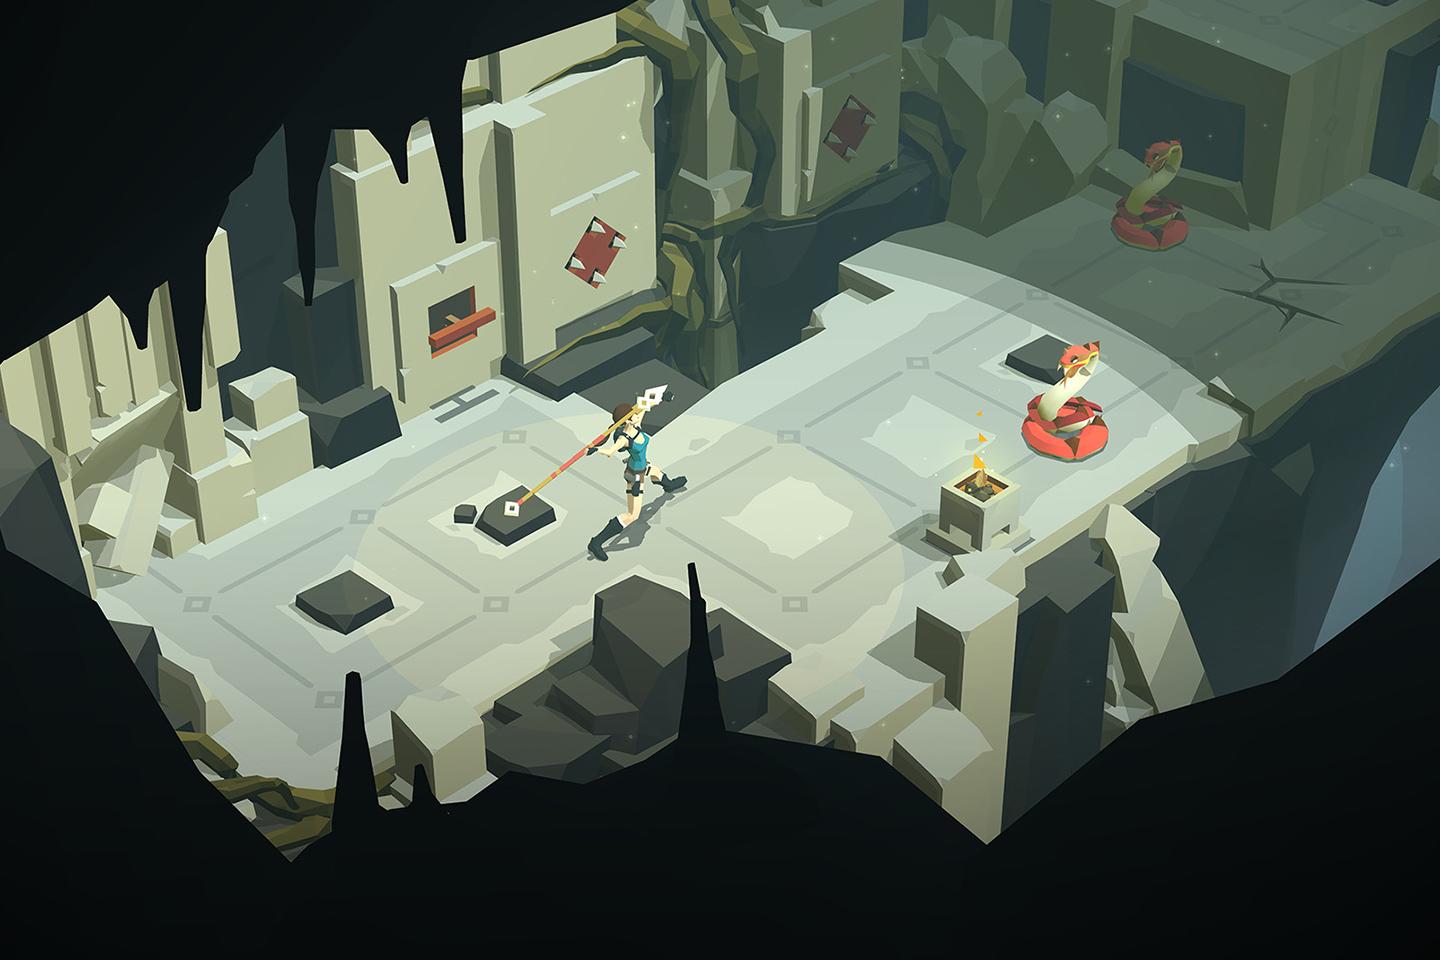 A screenshot from a puzzle game depicting a character using a grappling hook to interact with an ancient statue mechanism in a subterranean chamber.